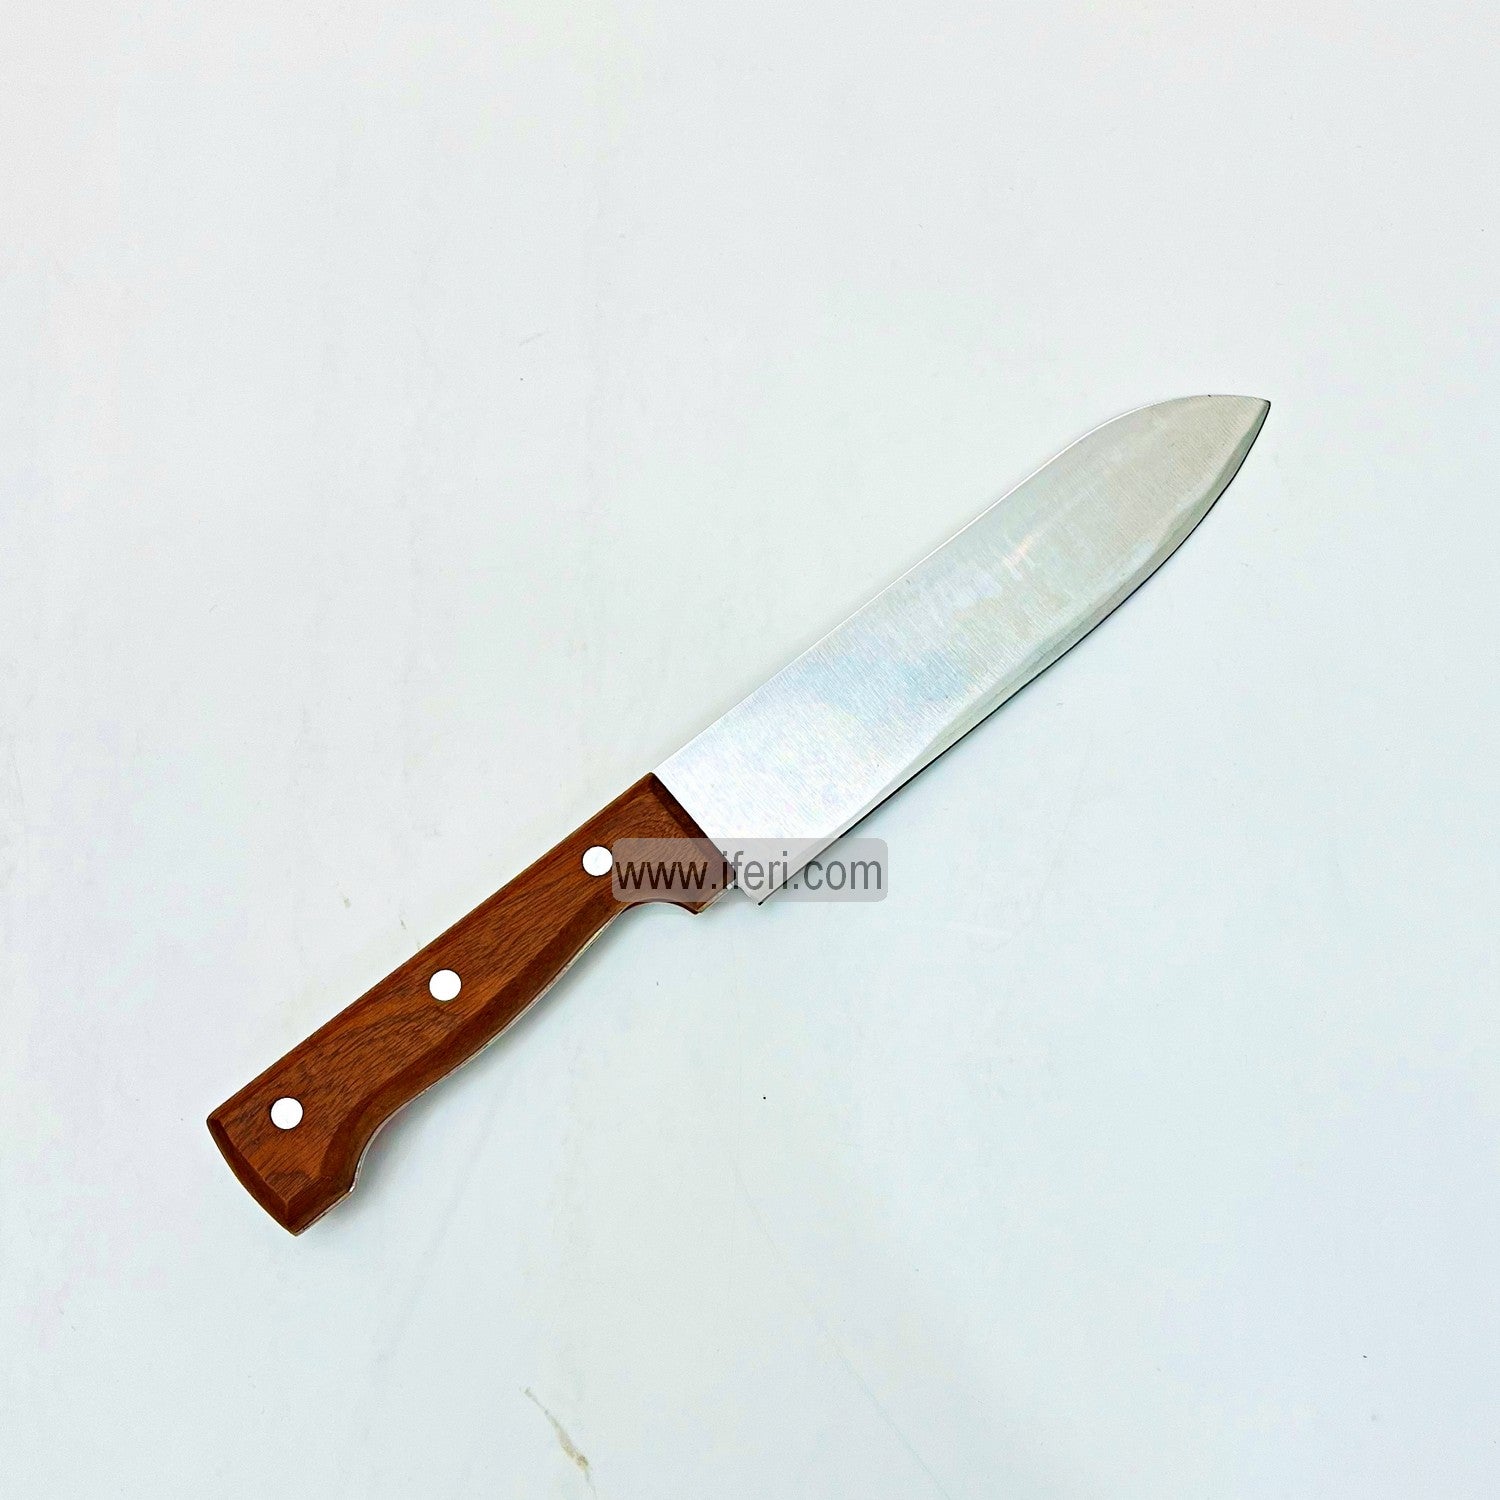 12 Inch Stainless Steel Kitchen Knife LB3639